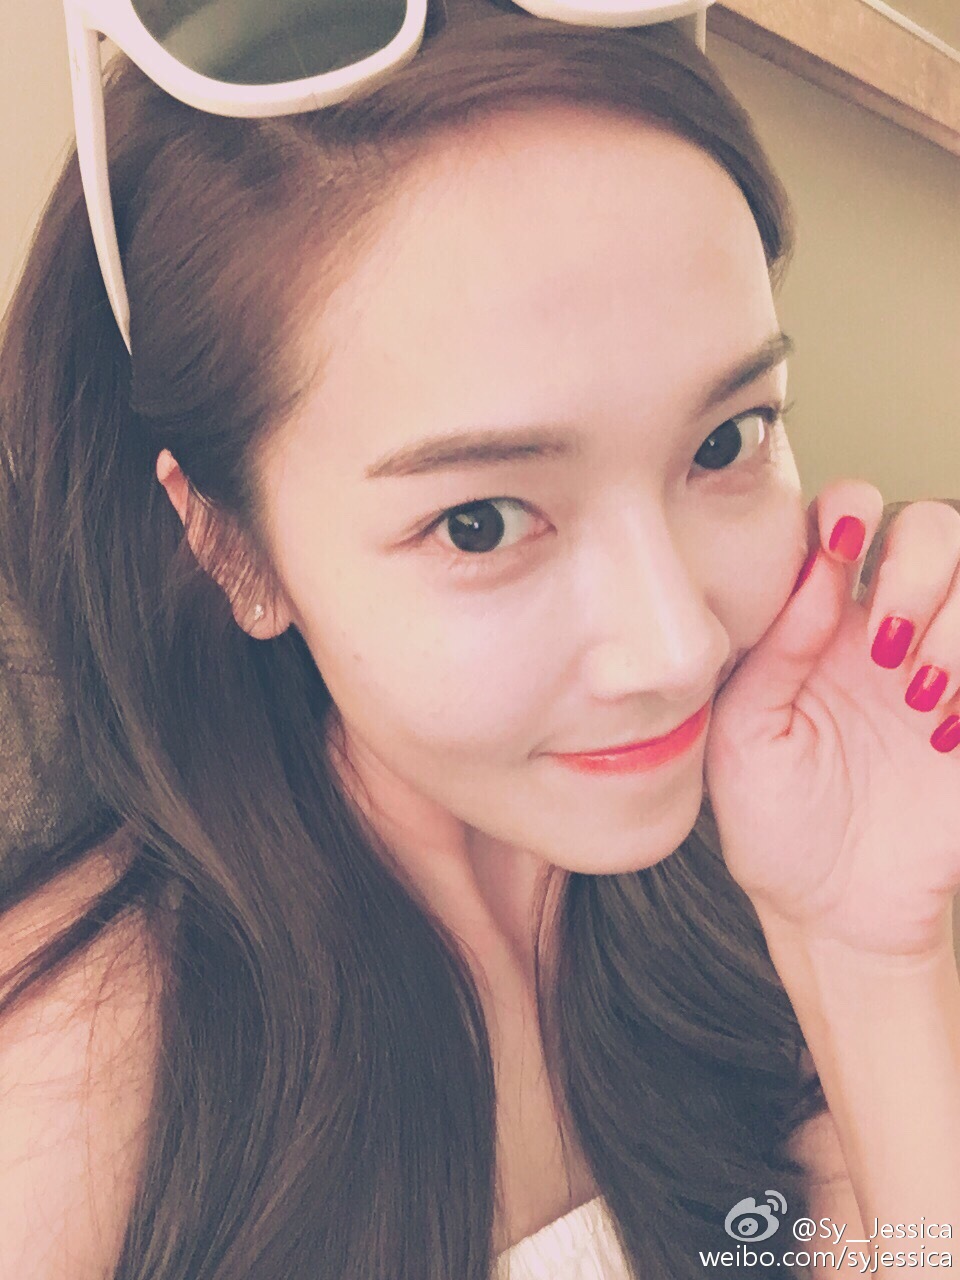 Check out the lovely selfies from Jessica Jung - Wonderful Generation